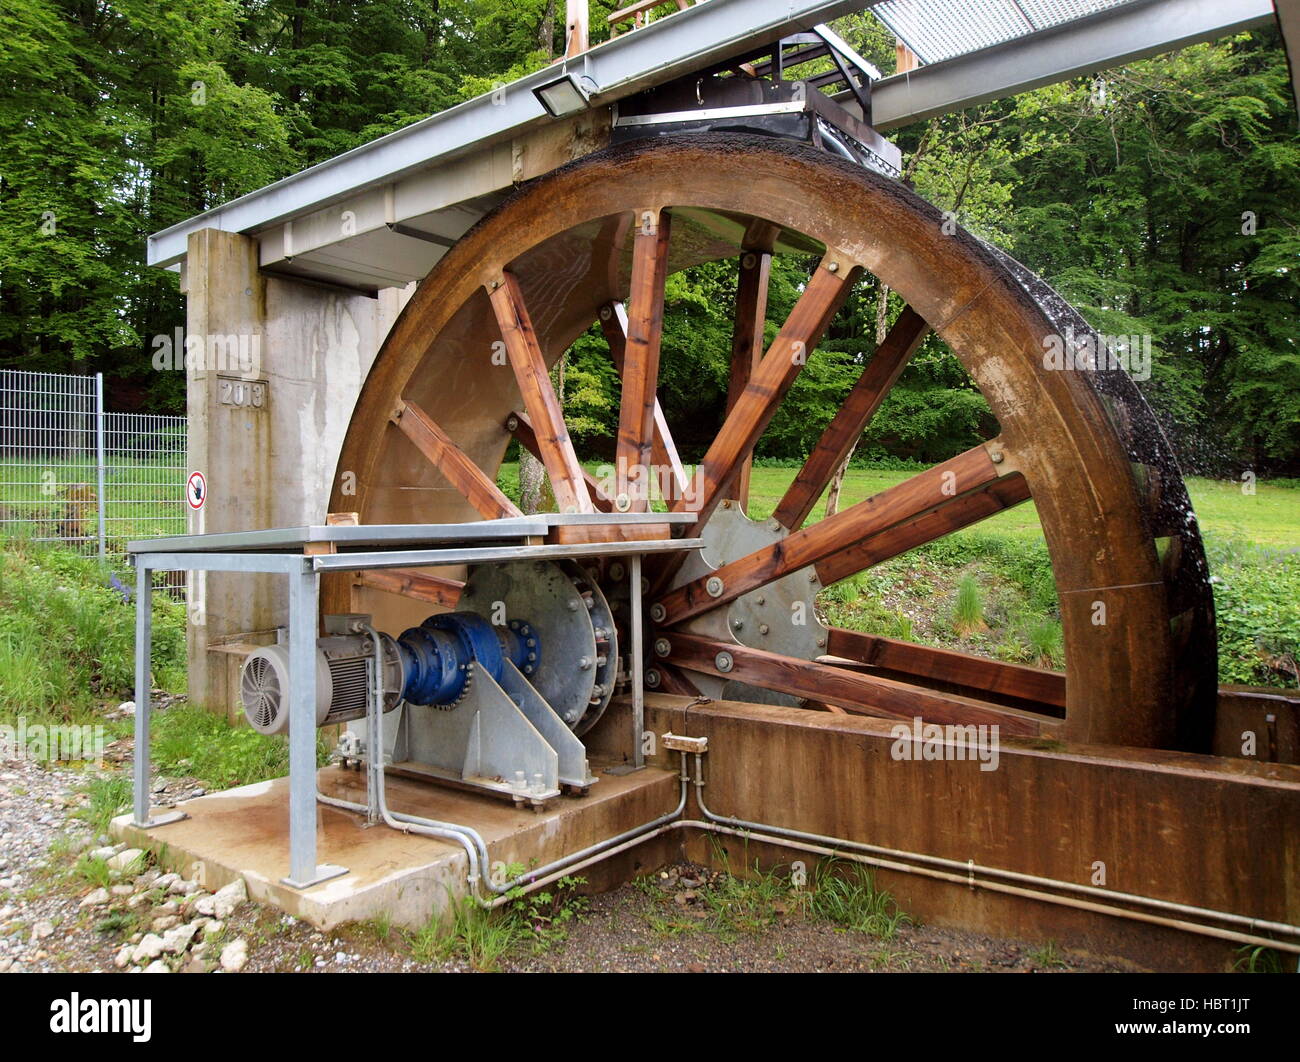 Modern water wheel to generate electricity Stock Photo - Alamy